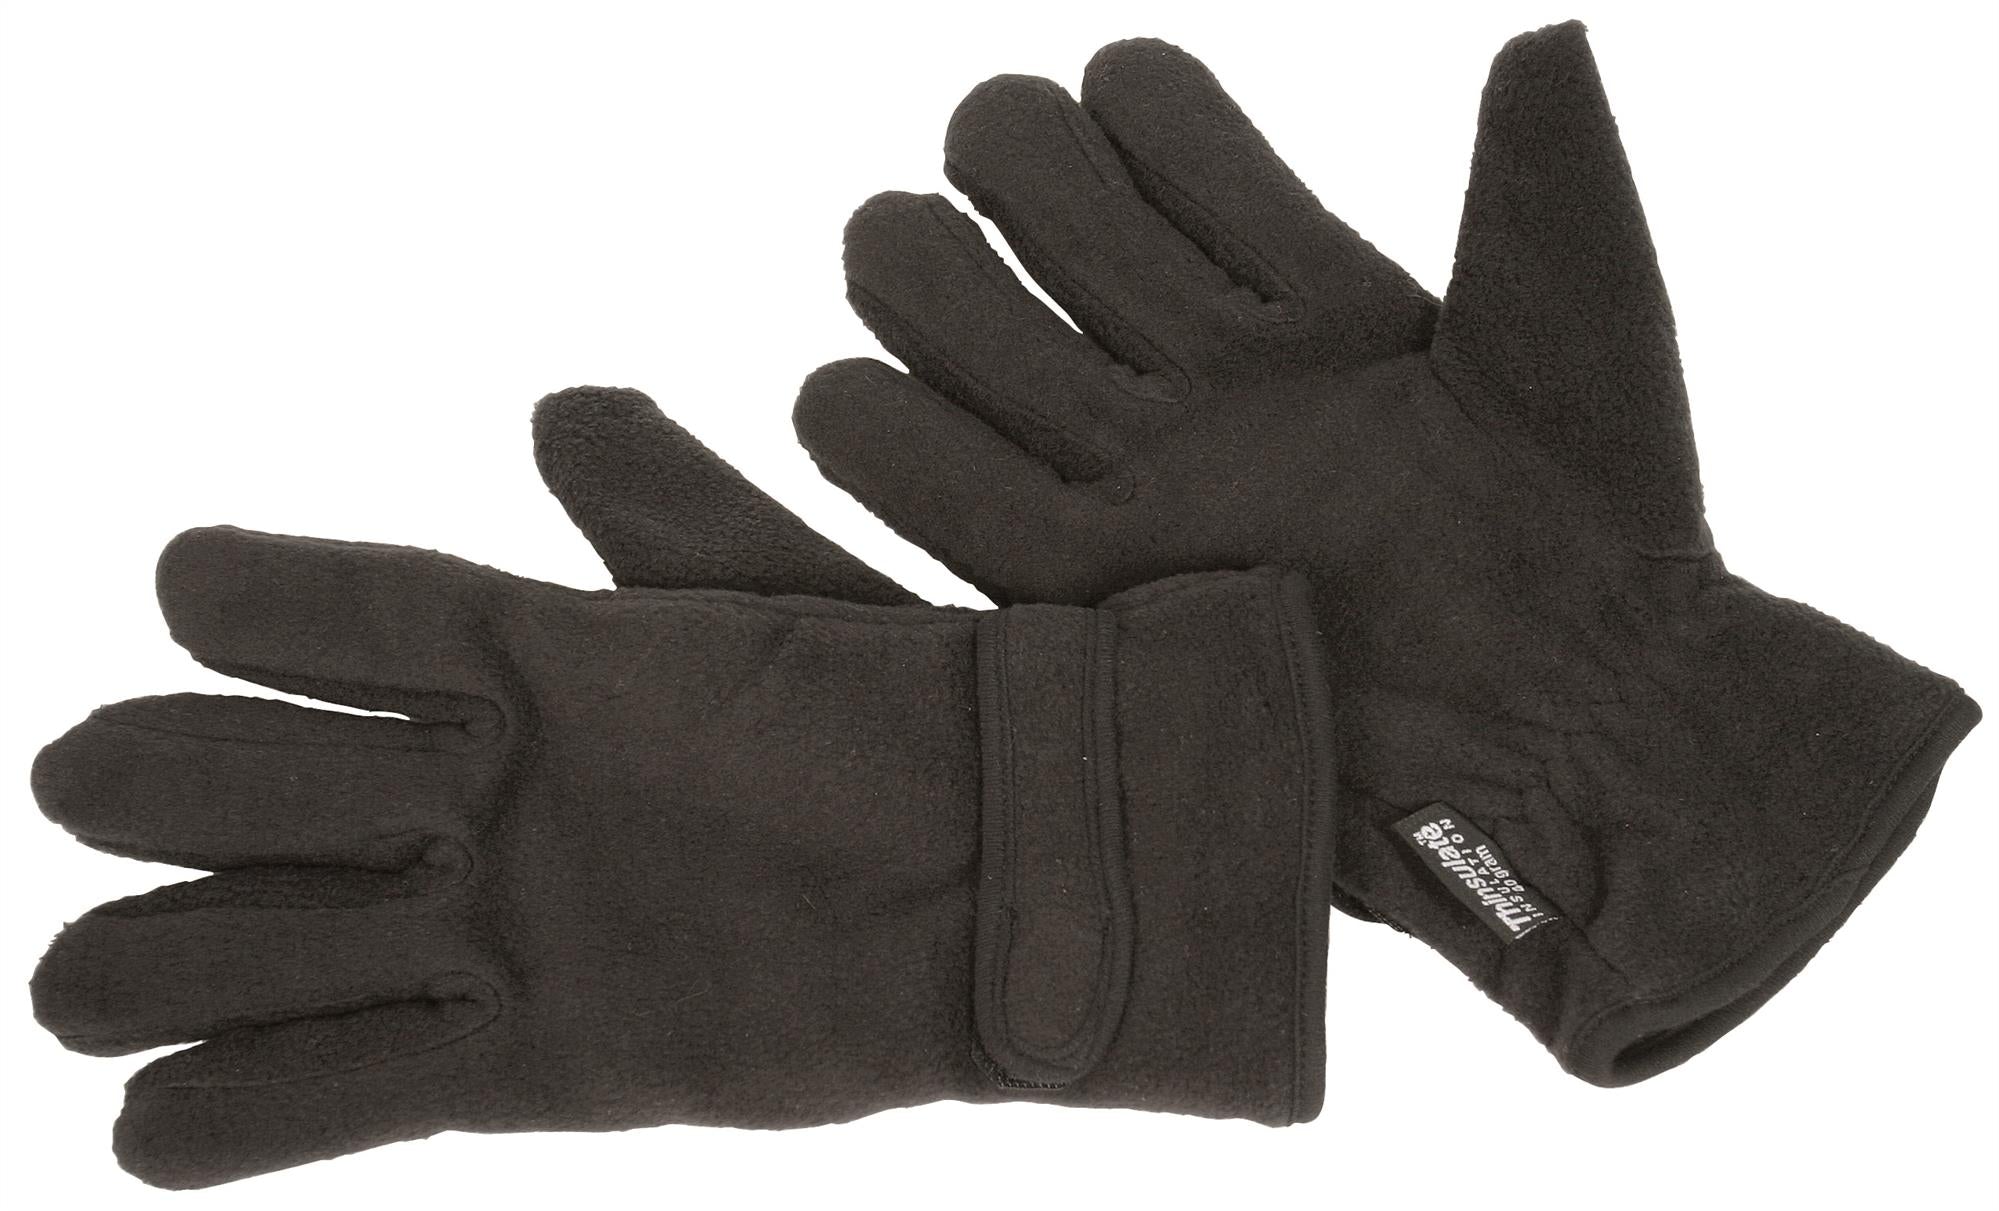 Fort Thinsulate thermal-lined black fleece winter glove #601